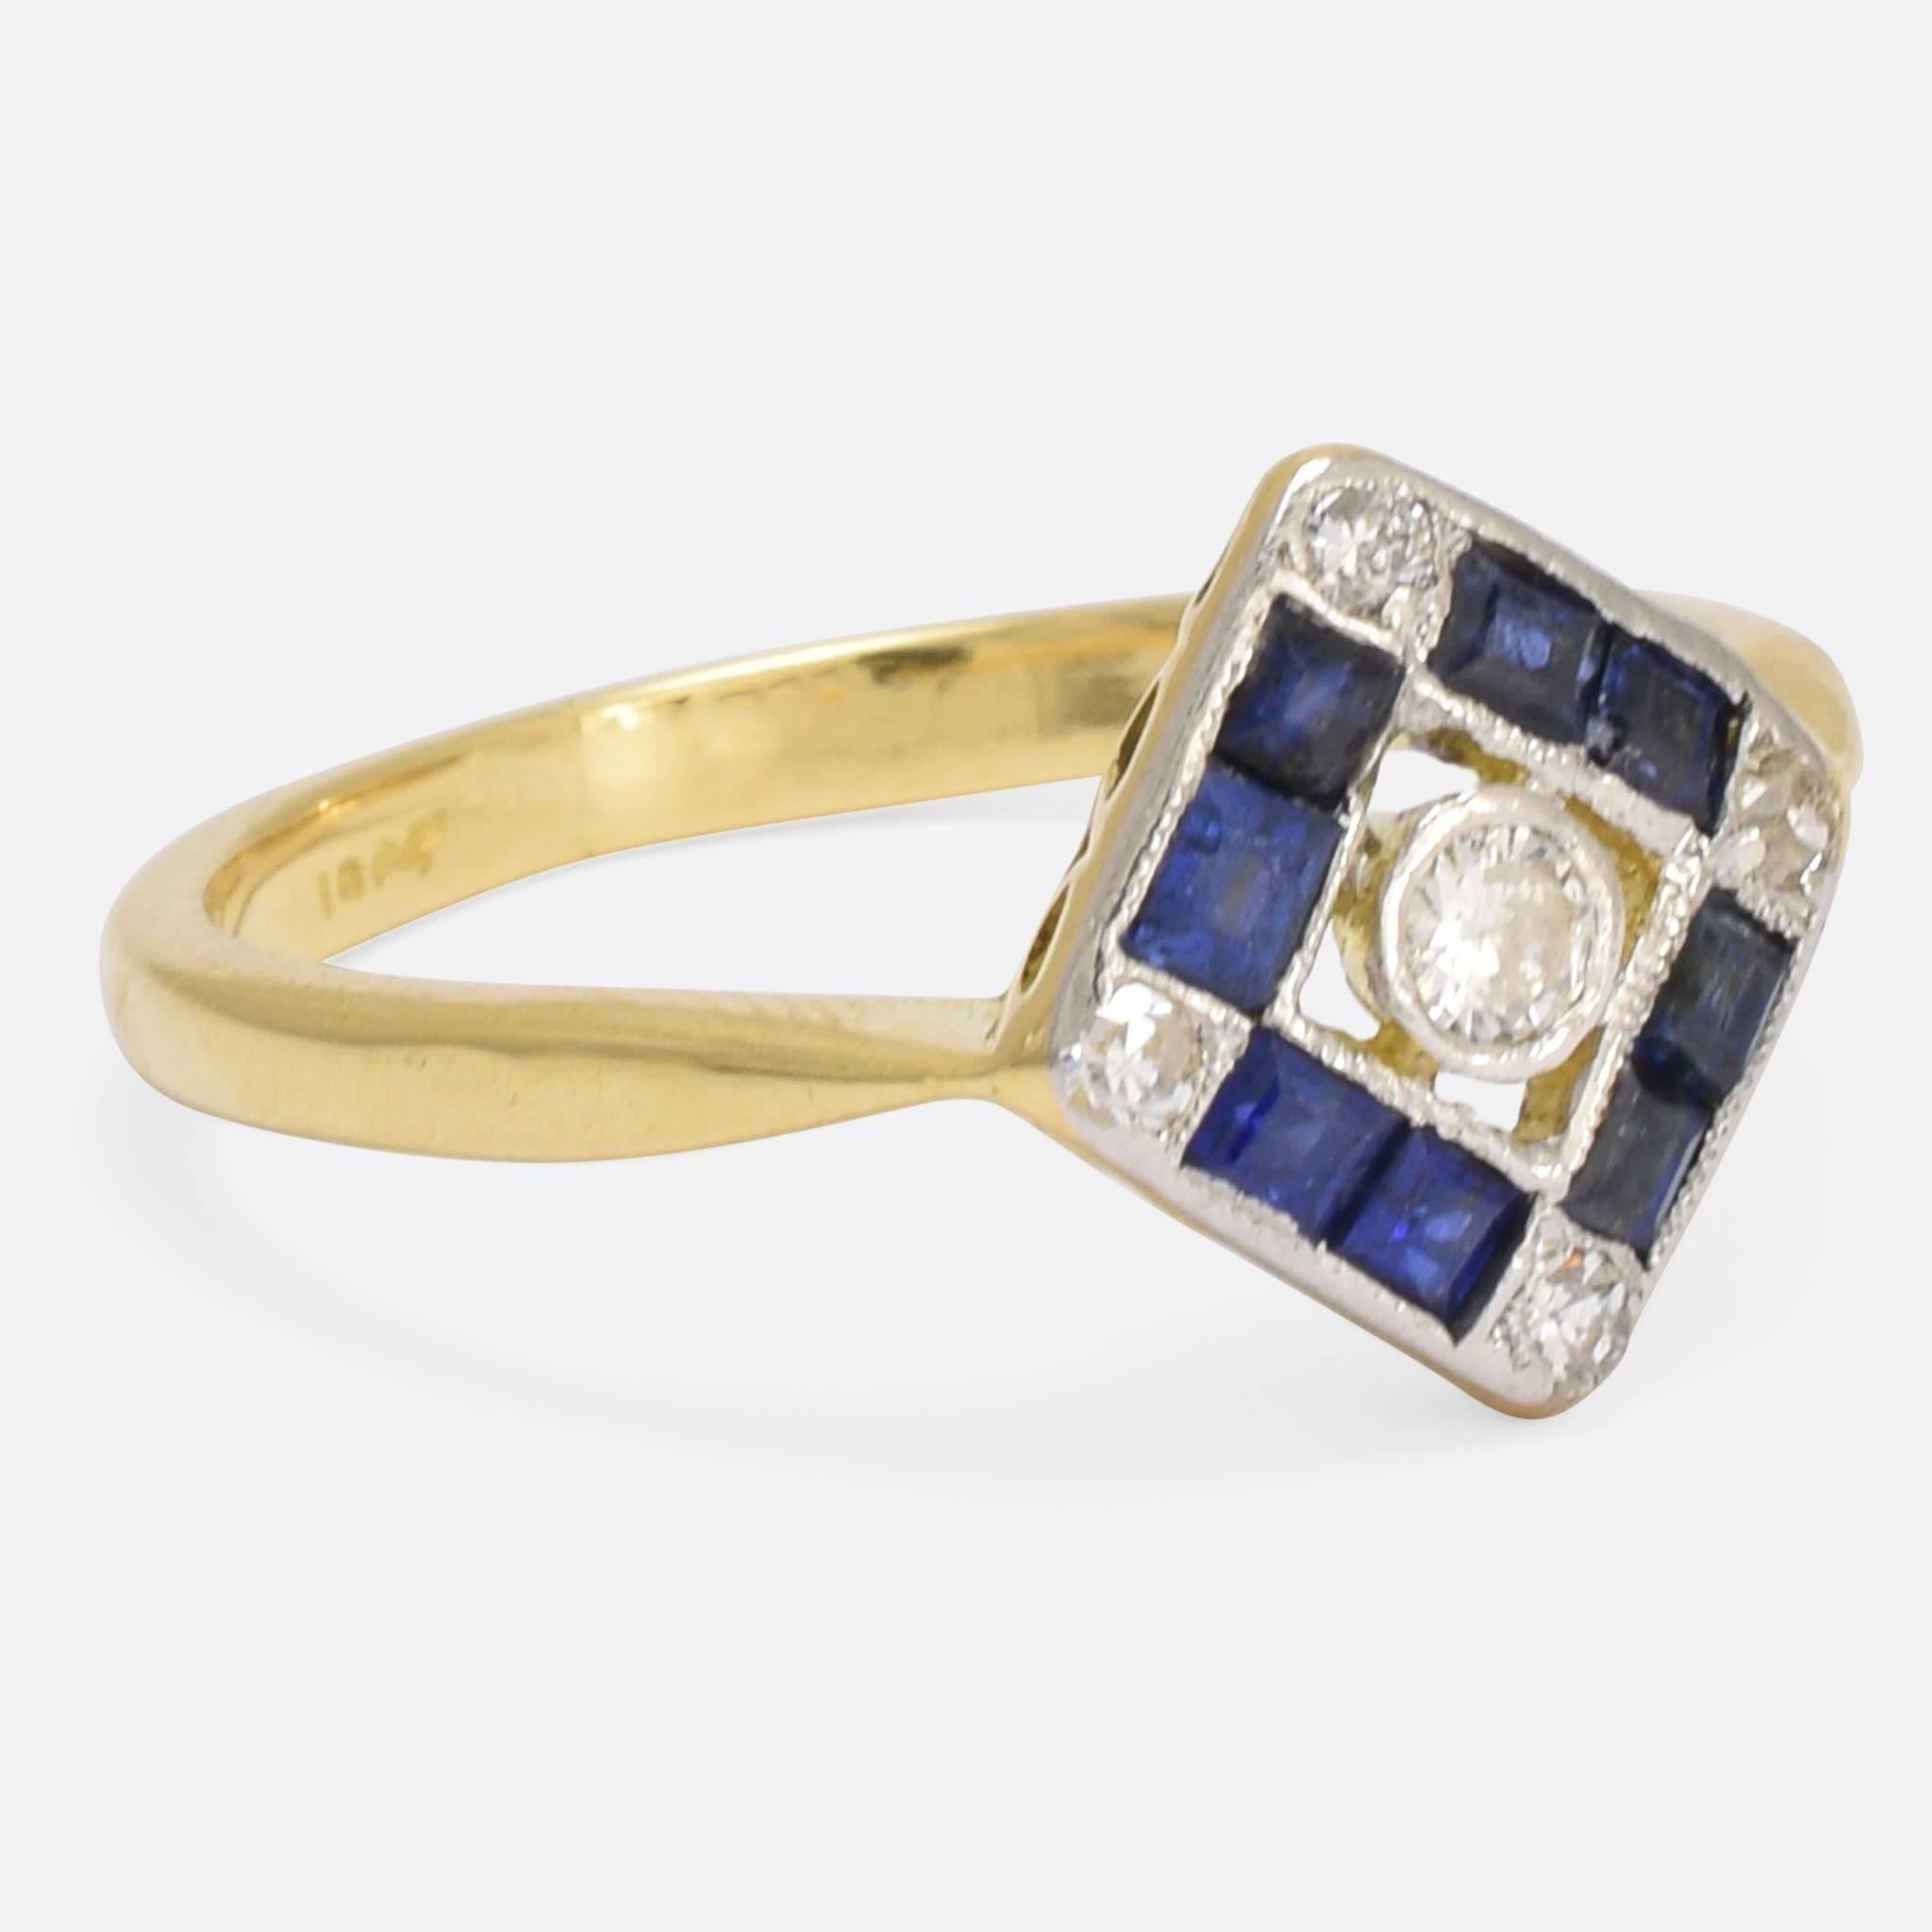 A stylish 1920s blue sapphire and diamond cluster ring, with square face and openworked gallery. The design is quintessentially Art Deco, with geometric shapes and striking use of contrast. Ring size: 6.75.